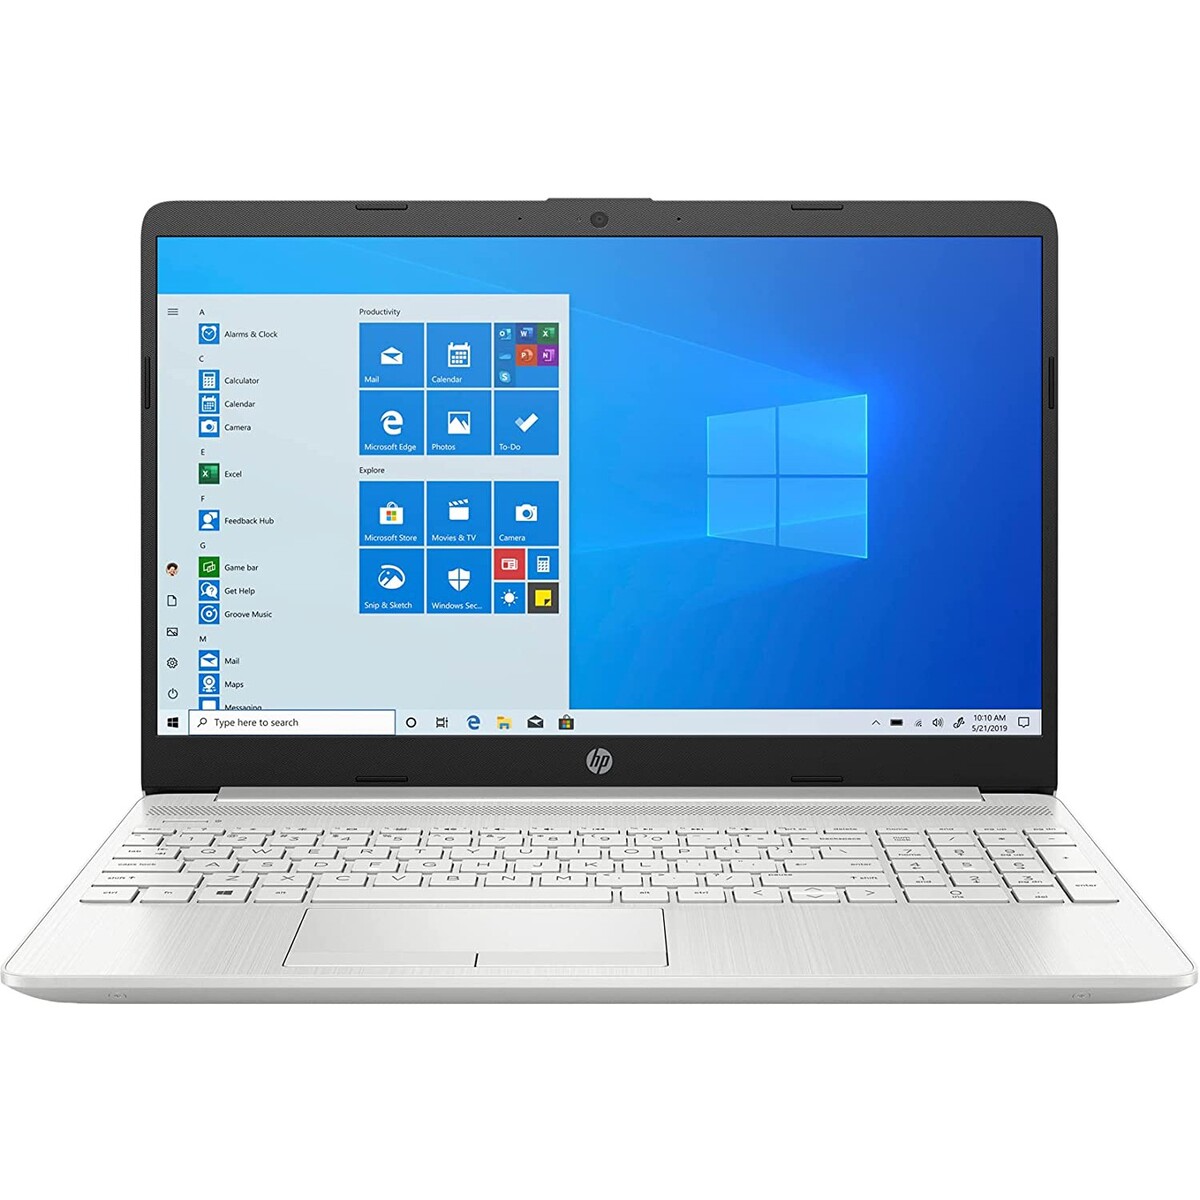 HP Notebook GY0501AU AMD R3 15.6" Win 10 Natural silver